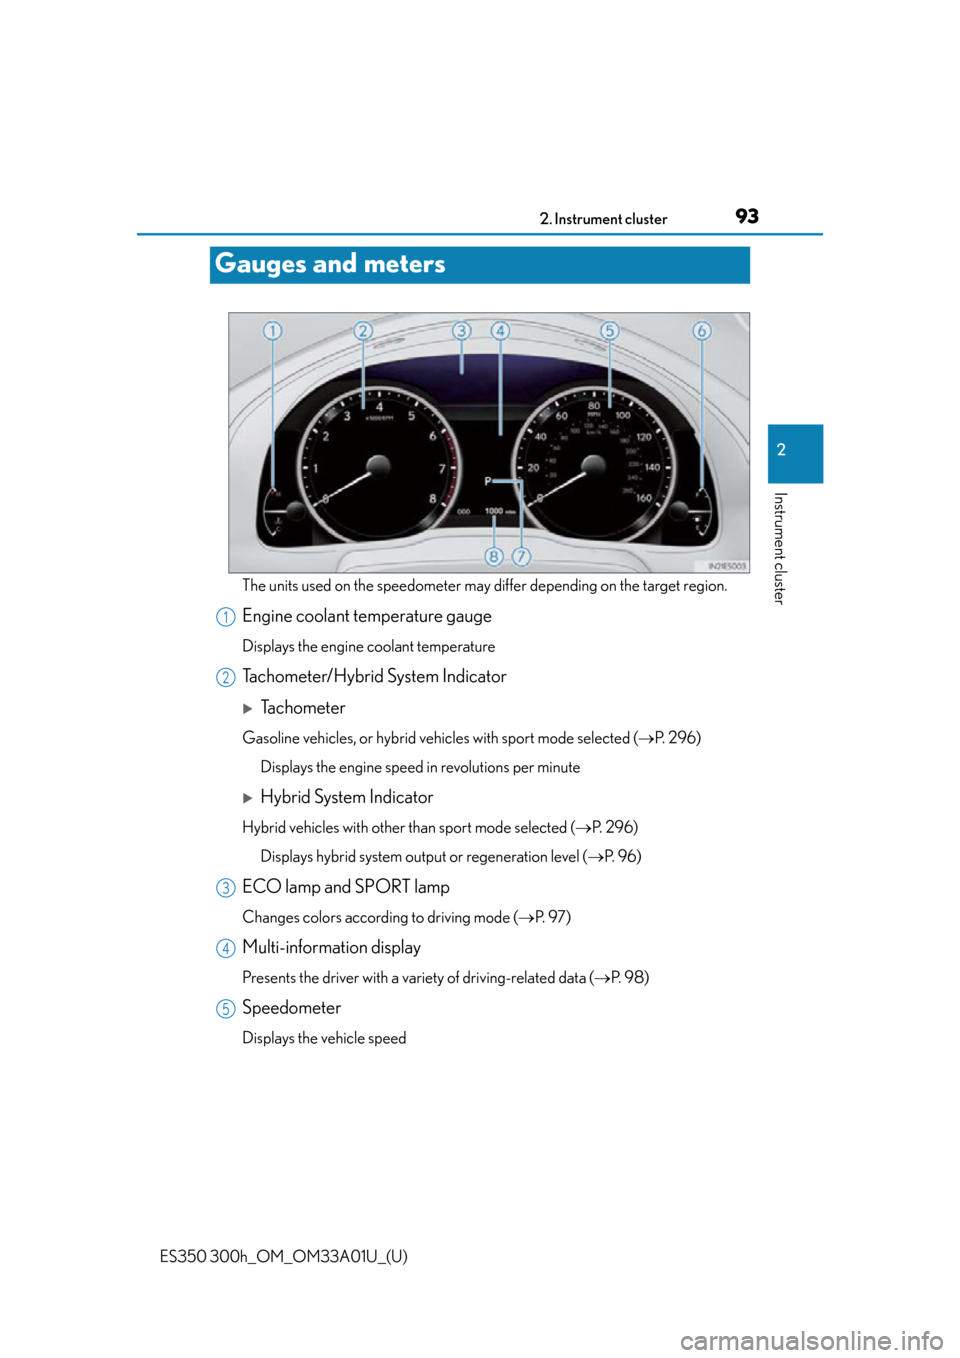 Lexus ES300h 2013  Do-it-yourself maintenance / Owners Manual (OM33A01U) 93
ES350 300h_OM_OM33A01U_(U)
2. Instrument cluster
2
Instrument cluster
Gauges and meters
The units used on the speedometer may differ depending on the target region.
Engine coolant temperature gauge